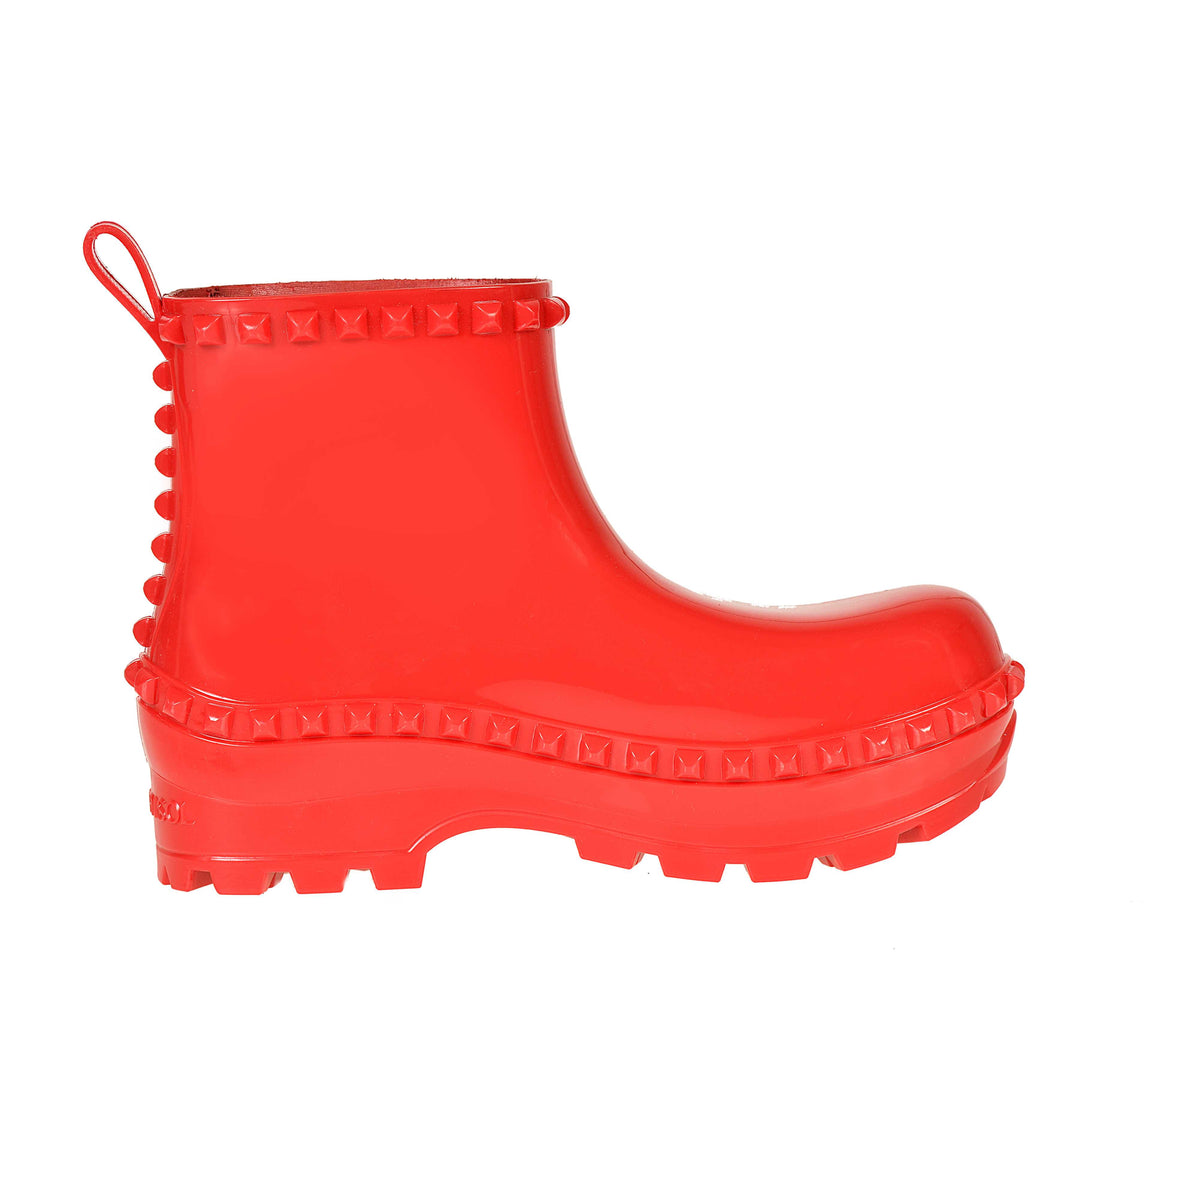 Graziano jelly Bottega puddle boots in color red